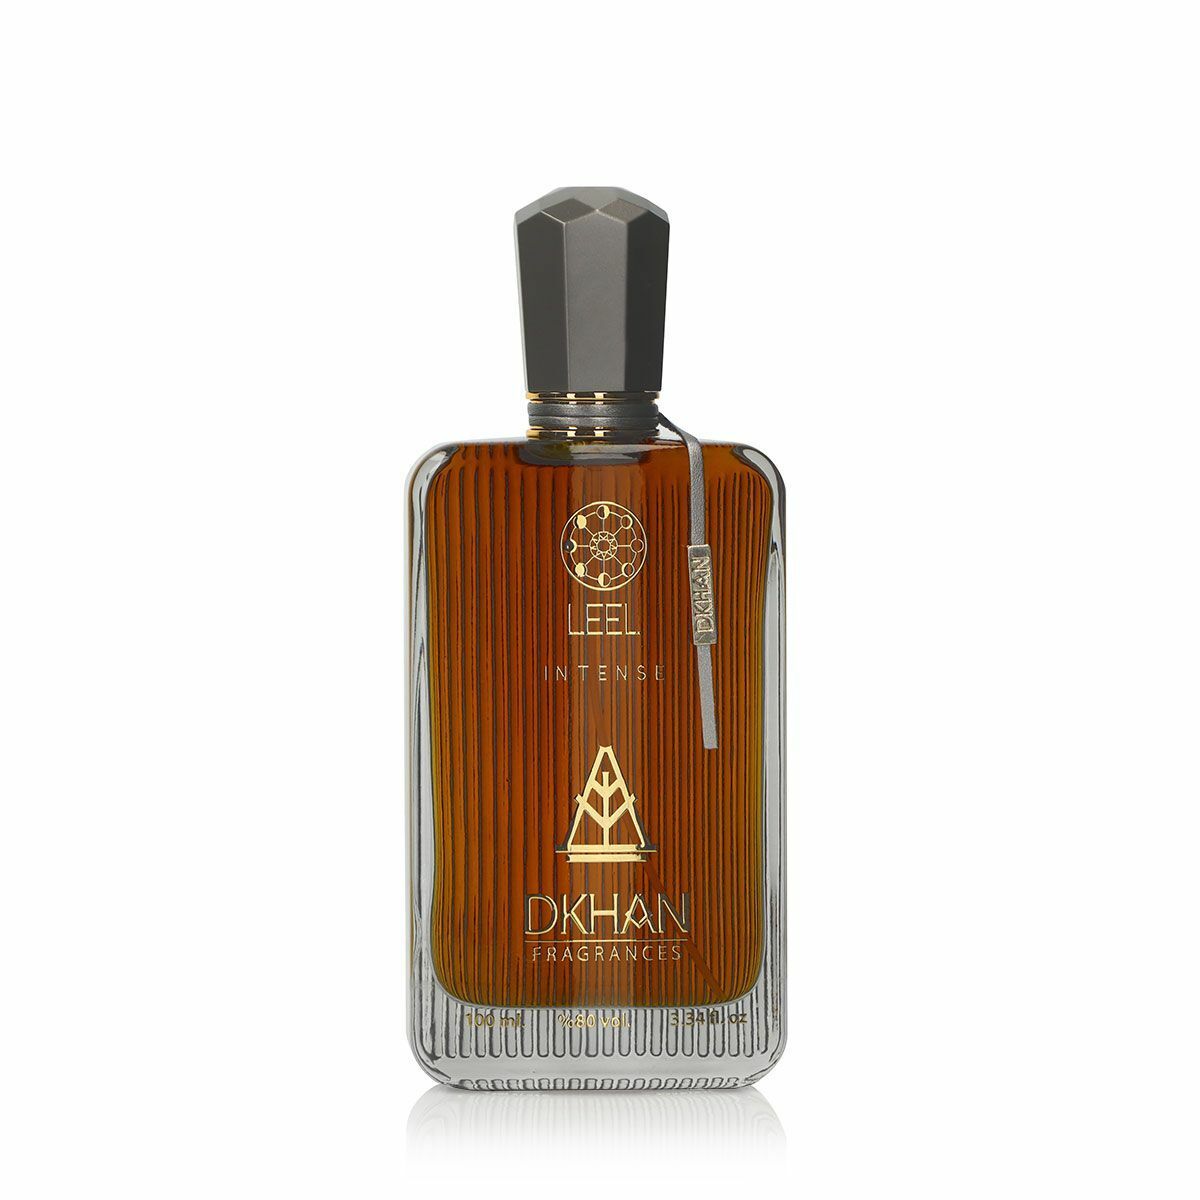 The image features a sleek glass perfume bottle with a rich, amber-hued liquid inside. The front of the bottle displays the word "LEEL" in large, bold letters, with "INTENSE" just beneath it in a smaller font. Below this, the "DKHAN FRAGRANCES" emblem is prominently centered. At the top of the bottle, a golden geometric design is visible. The cap is a faceted black design, suggesting a luxurious and modern aesthetic. 